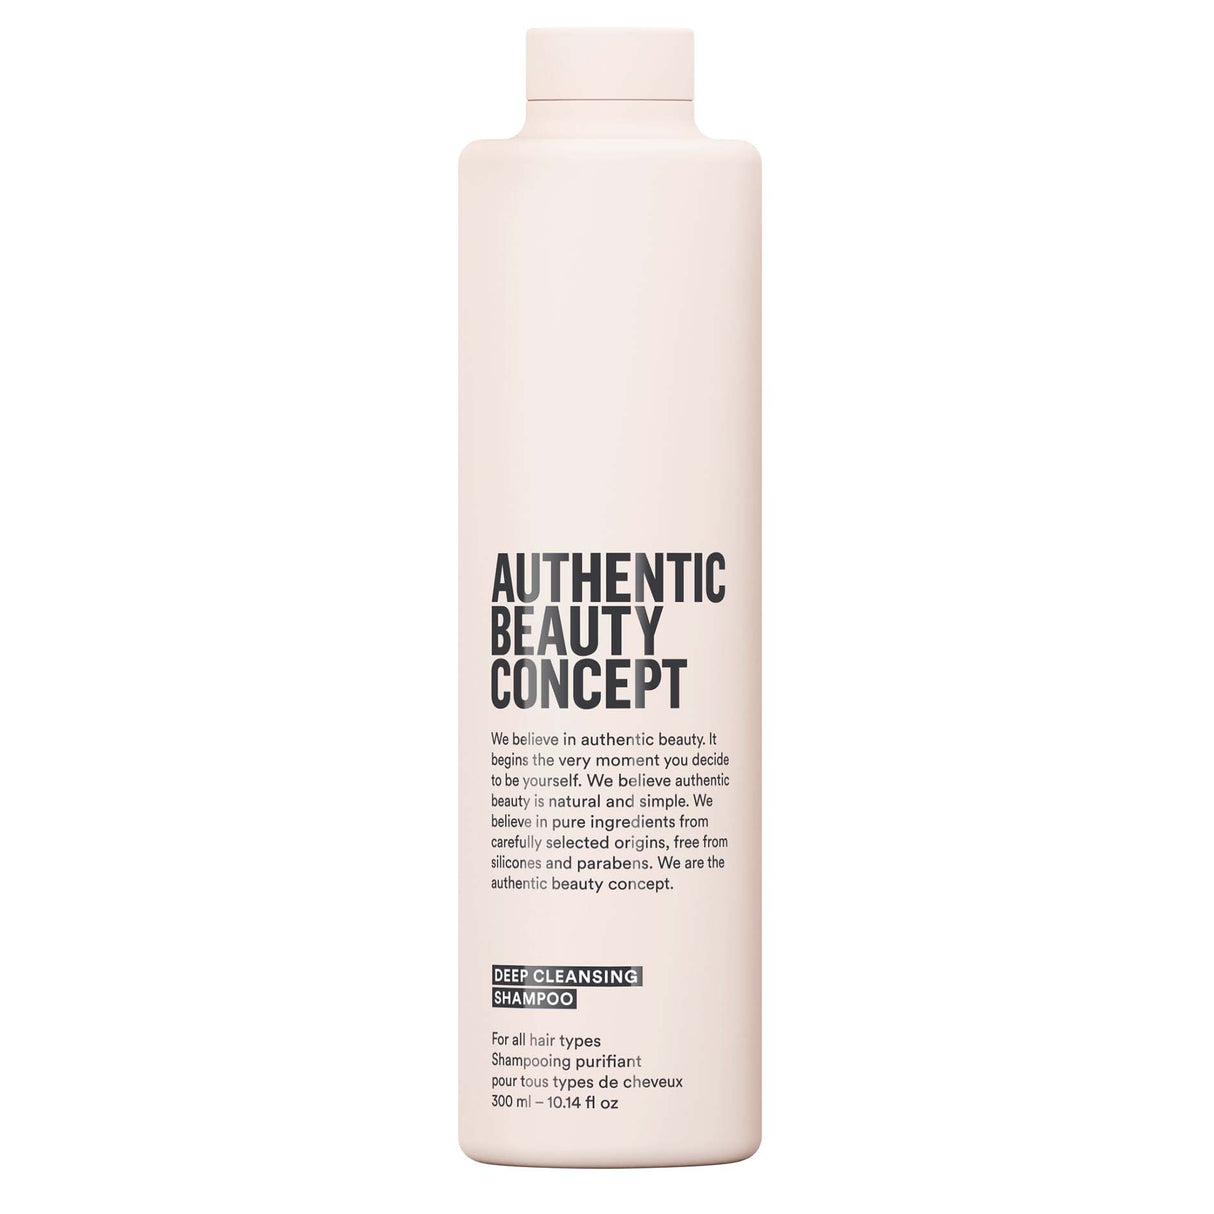 Deep Cleansing Shampoo-Authentic Beauty Concept